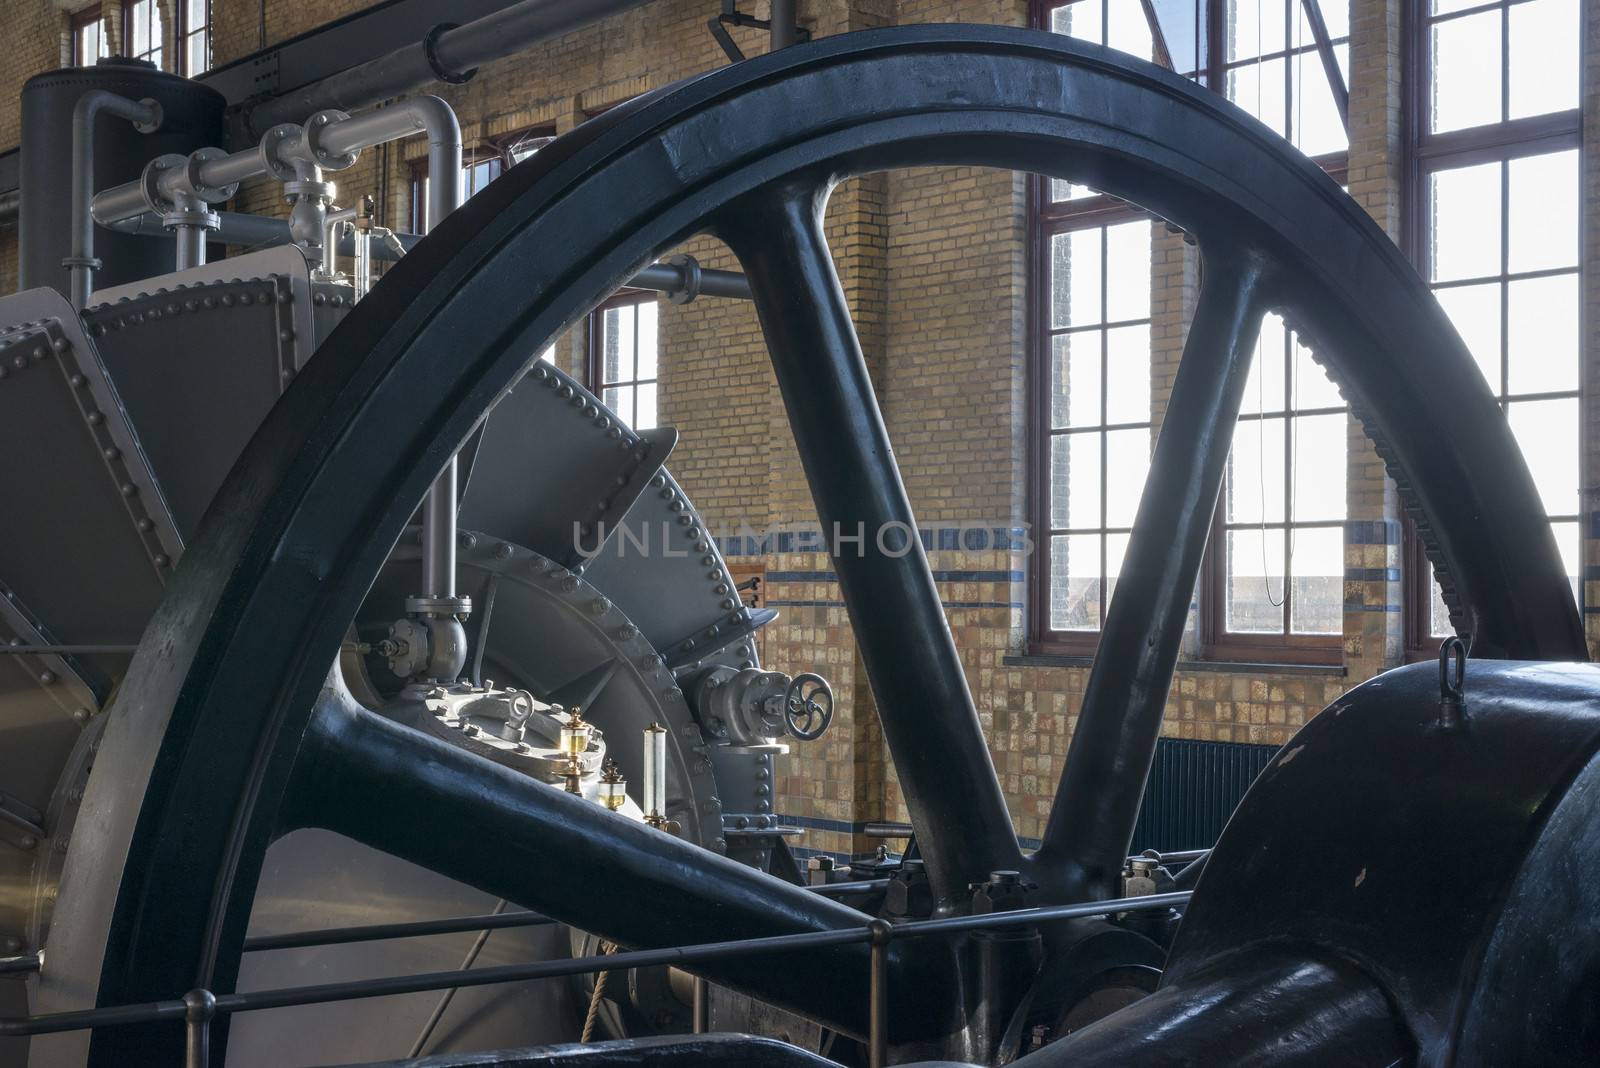 The ir. D.F. Woudagemaal in Lemmer,on the world heritage list, opened in 1920 by Queen Wilhelmina, is the largest steam-driven pumping station in the world still in use.Even today the monumental pumping station ensures that the people keep their feet dry during high water